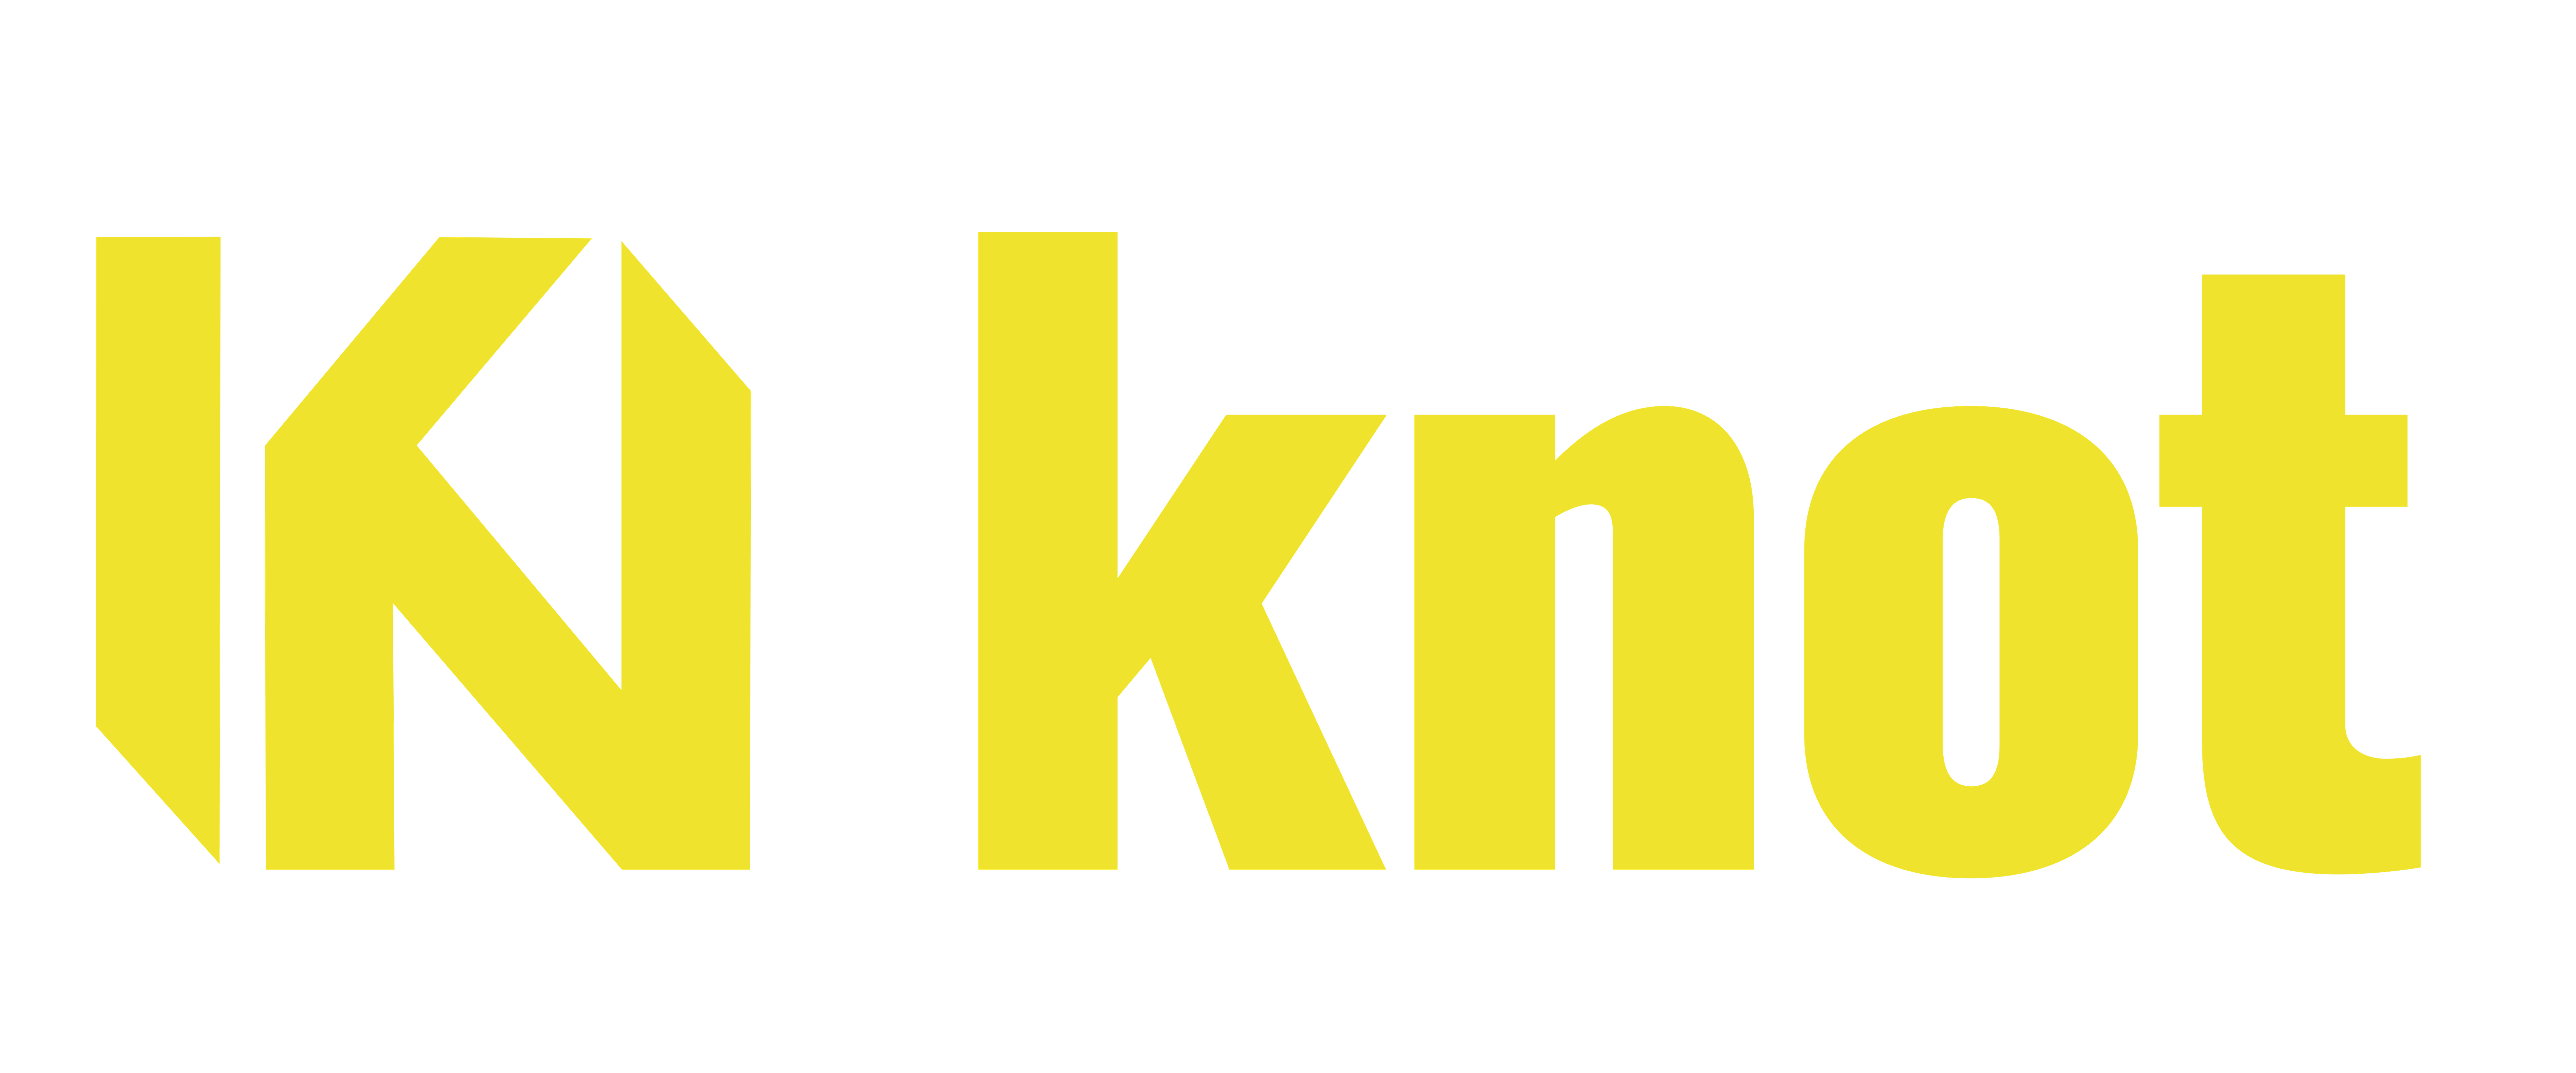 knotロゴ